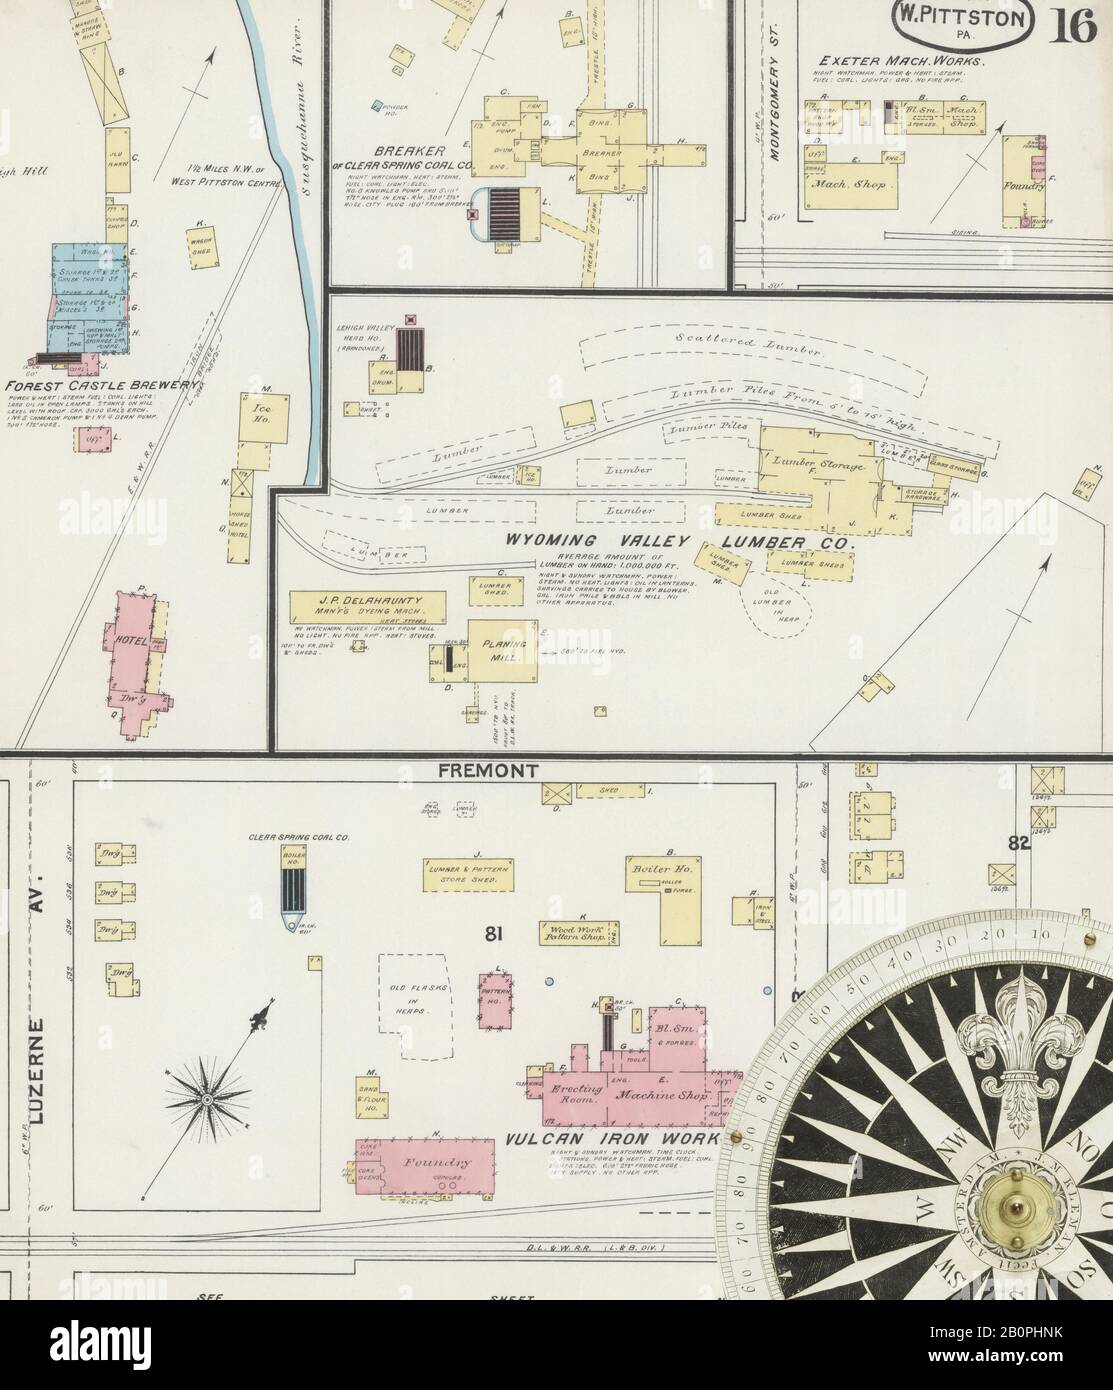 Image 16 of Sanborn Fire Insurance Map from Pittston, Luzerne County, Pennsylvania. Apr 1891. 16 Sheet(s), America, street map with a Nineteenth Century compass Stock Photo